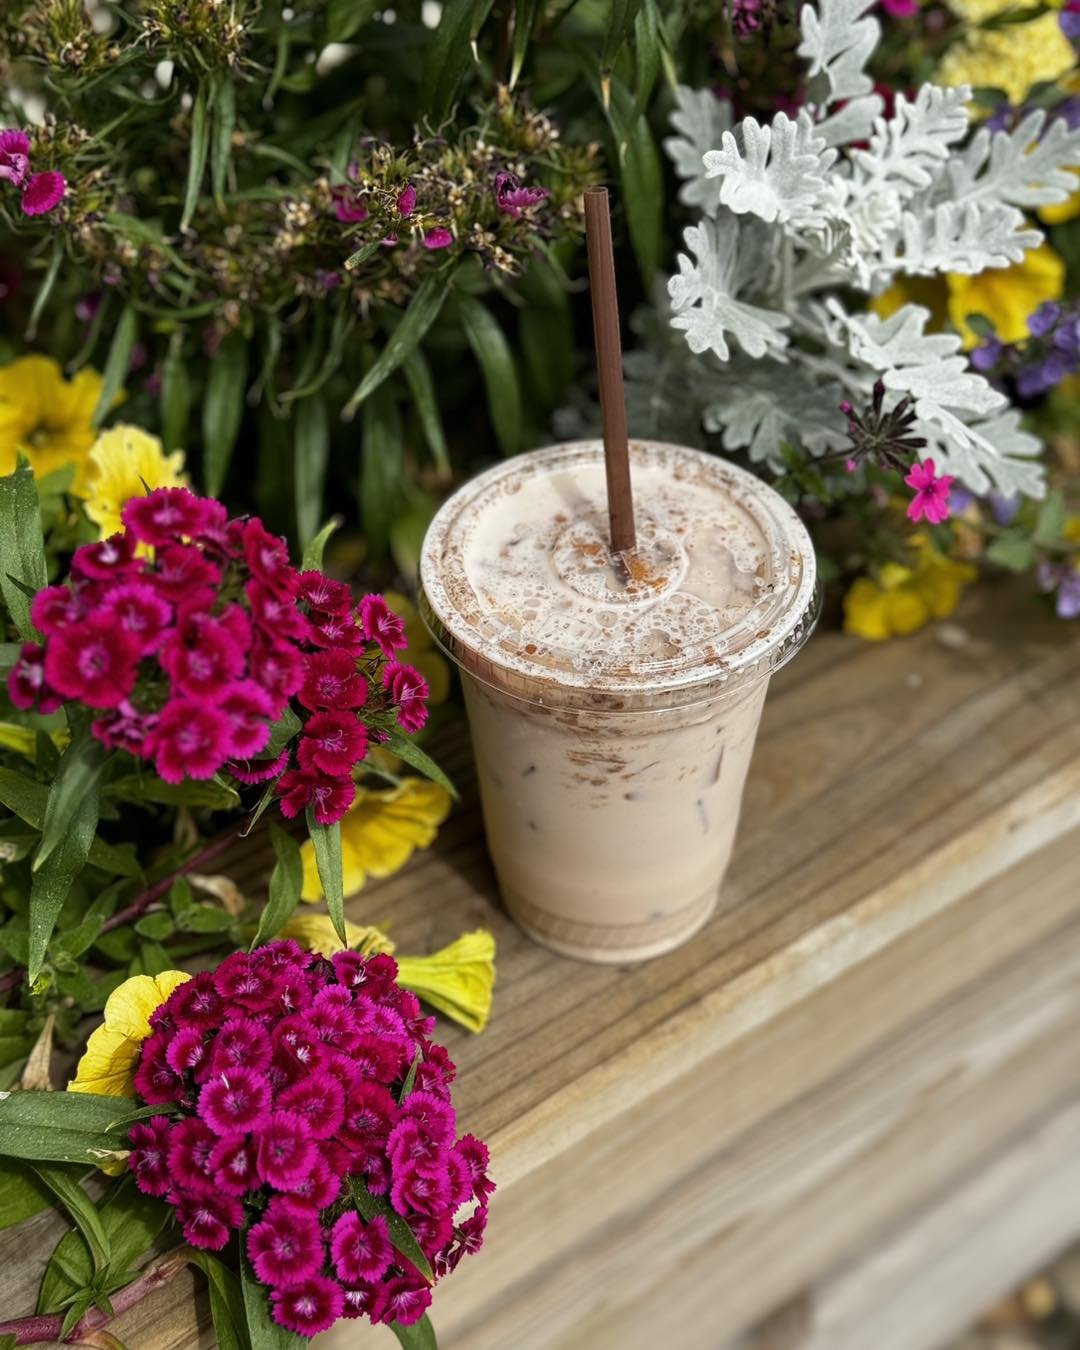 they say it&rsquo;s going to rain all day, so here&rsquo;s an iced chai and some gorgeous flowers to brighten your morning.

big thanks to our dear friend and neighbor, Jess, from Krysset shop, for letting us use her gorgeous planters for this little